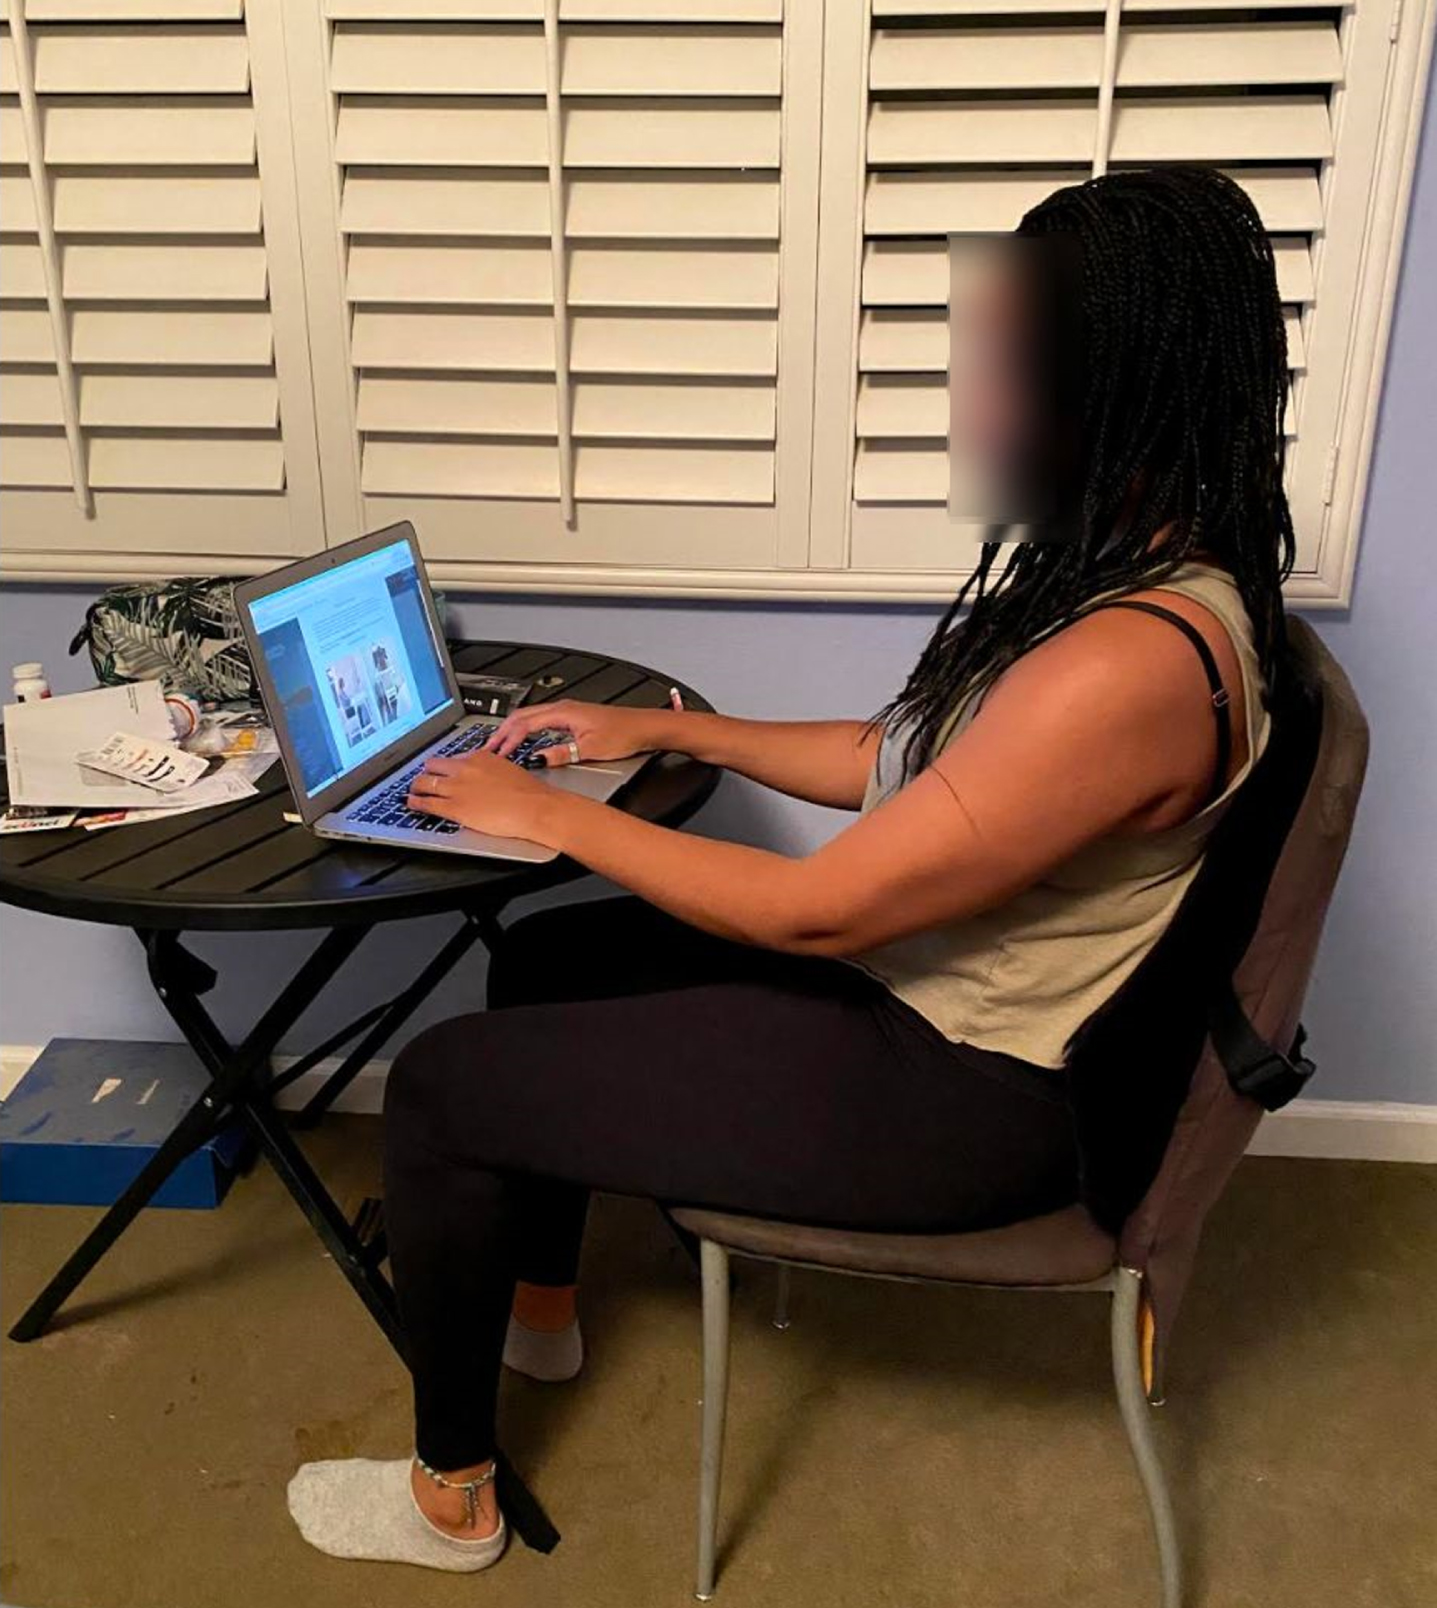 Participant at initial workstation. Example of a participant completely changing their workstation location from a family home to an apartment, resulting in many changes including a lumbar supportive chair, armrests, and laptop height, while making potentially unproductive changes such as facing a window.